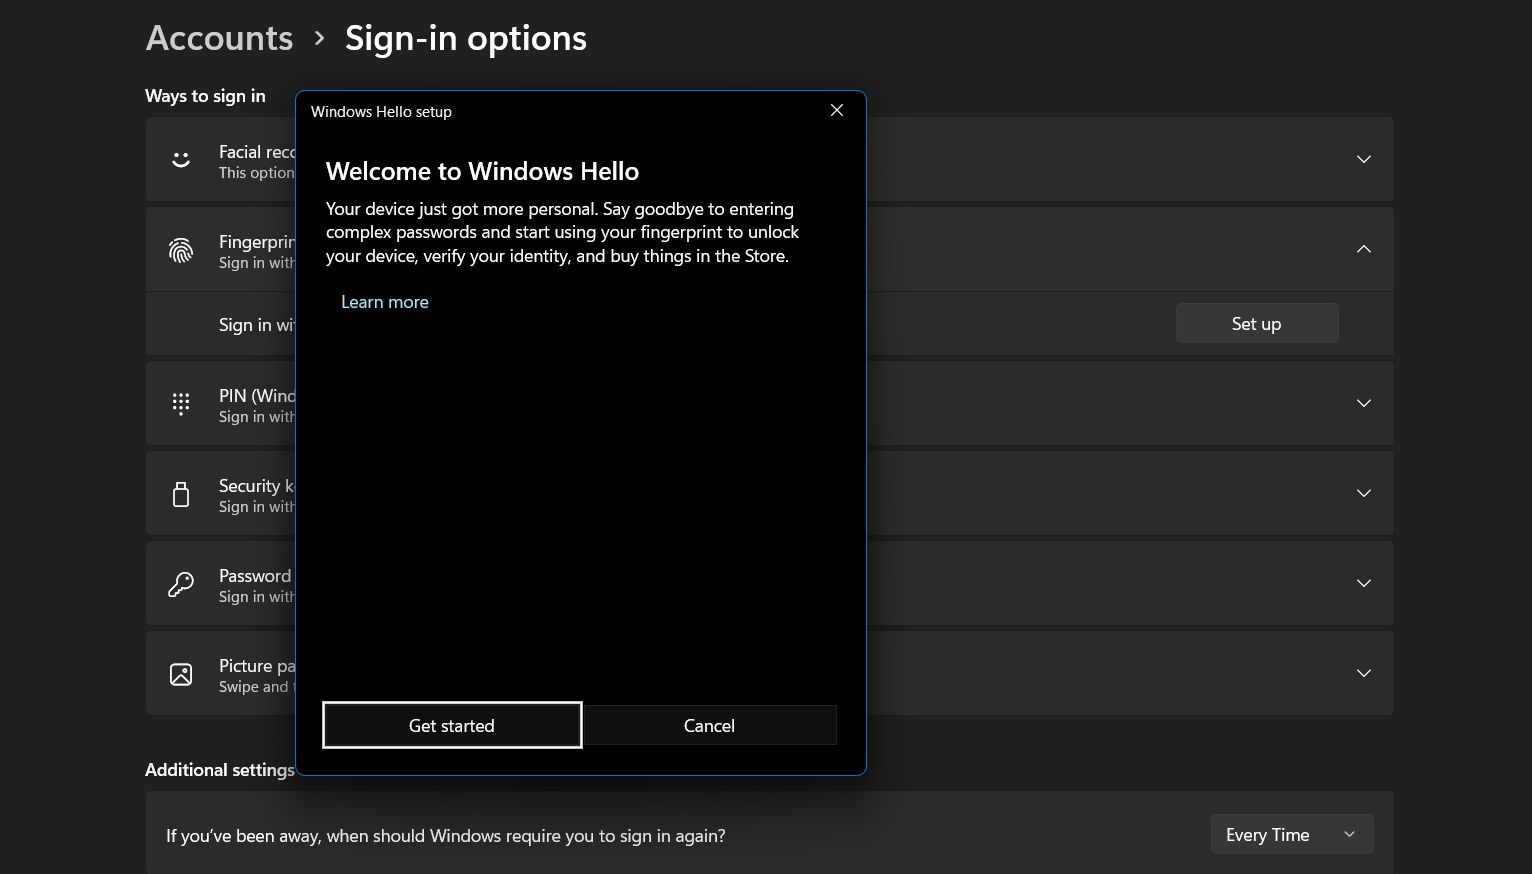 Get Started option to set up Windows Hello